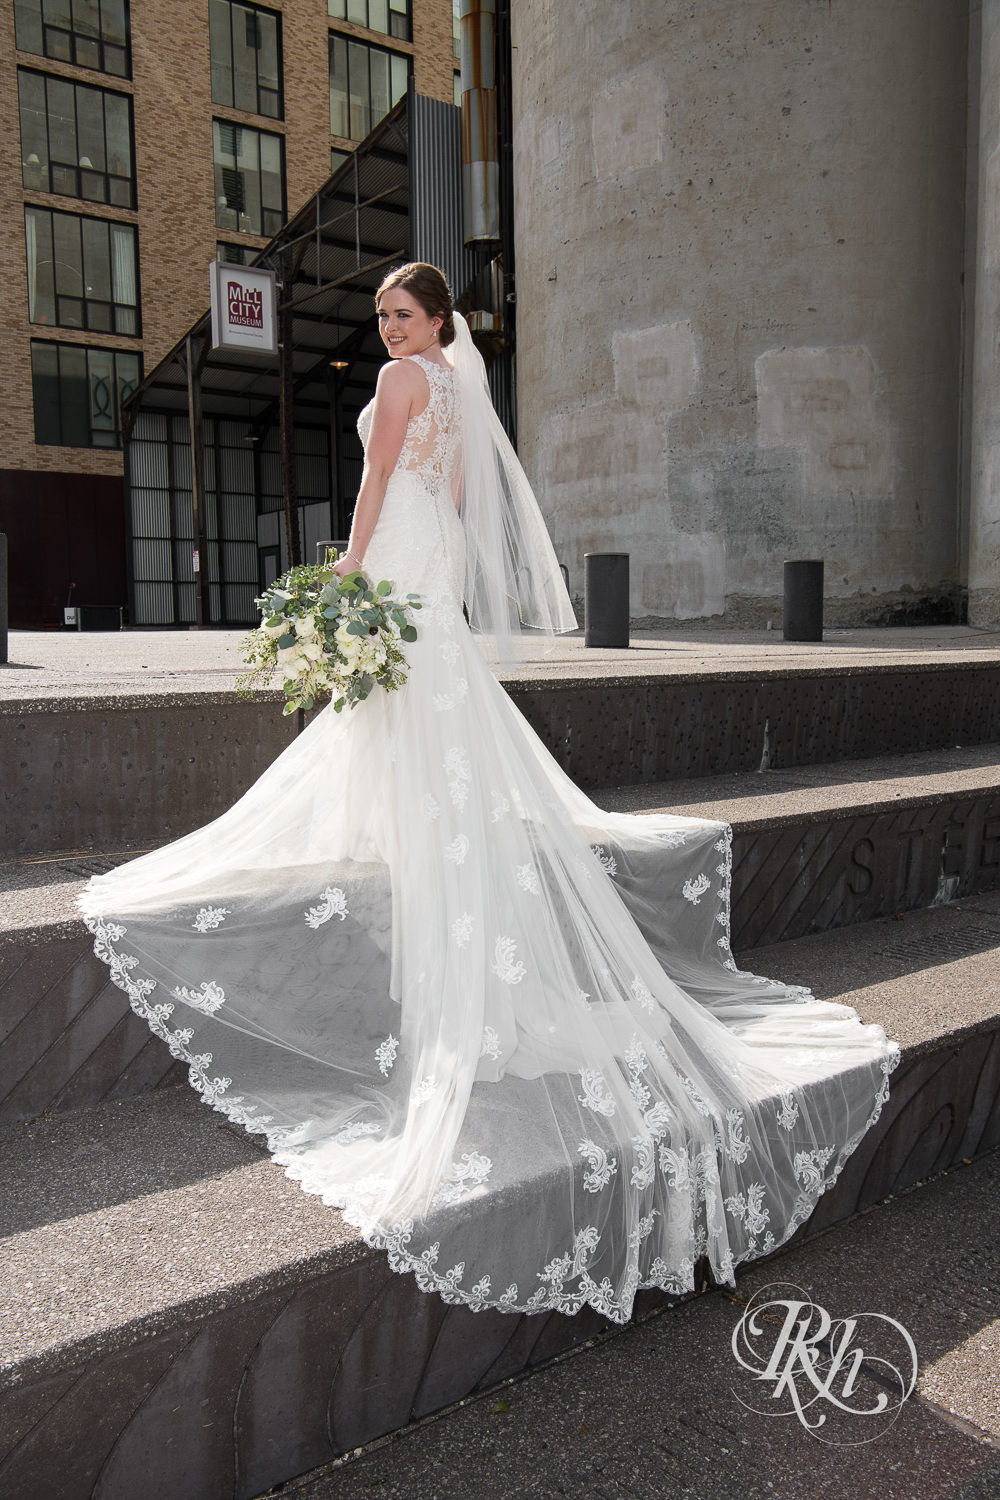 Bride with long veil holds flowers and stands on stairs in Minneapolis, Minnesota.